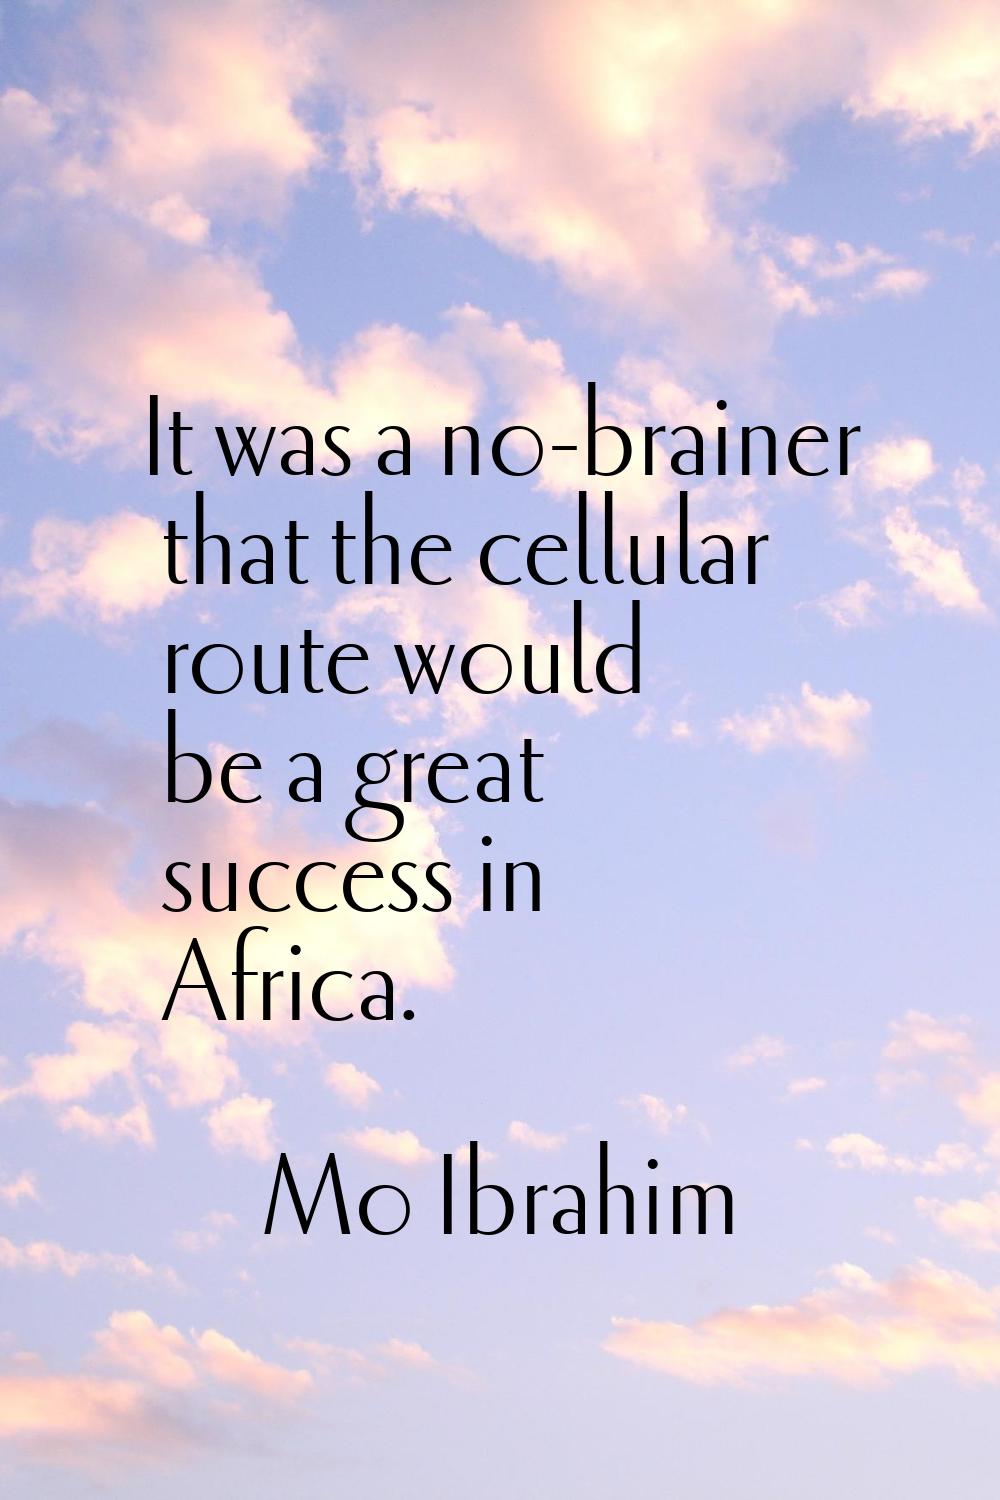 It was a no-brainer that the cellular route would be a great success in Africa.